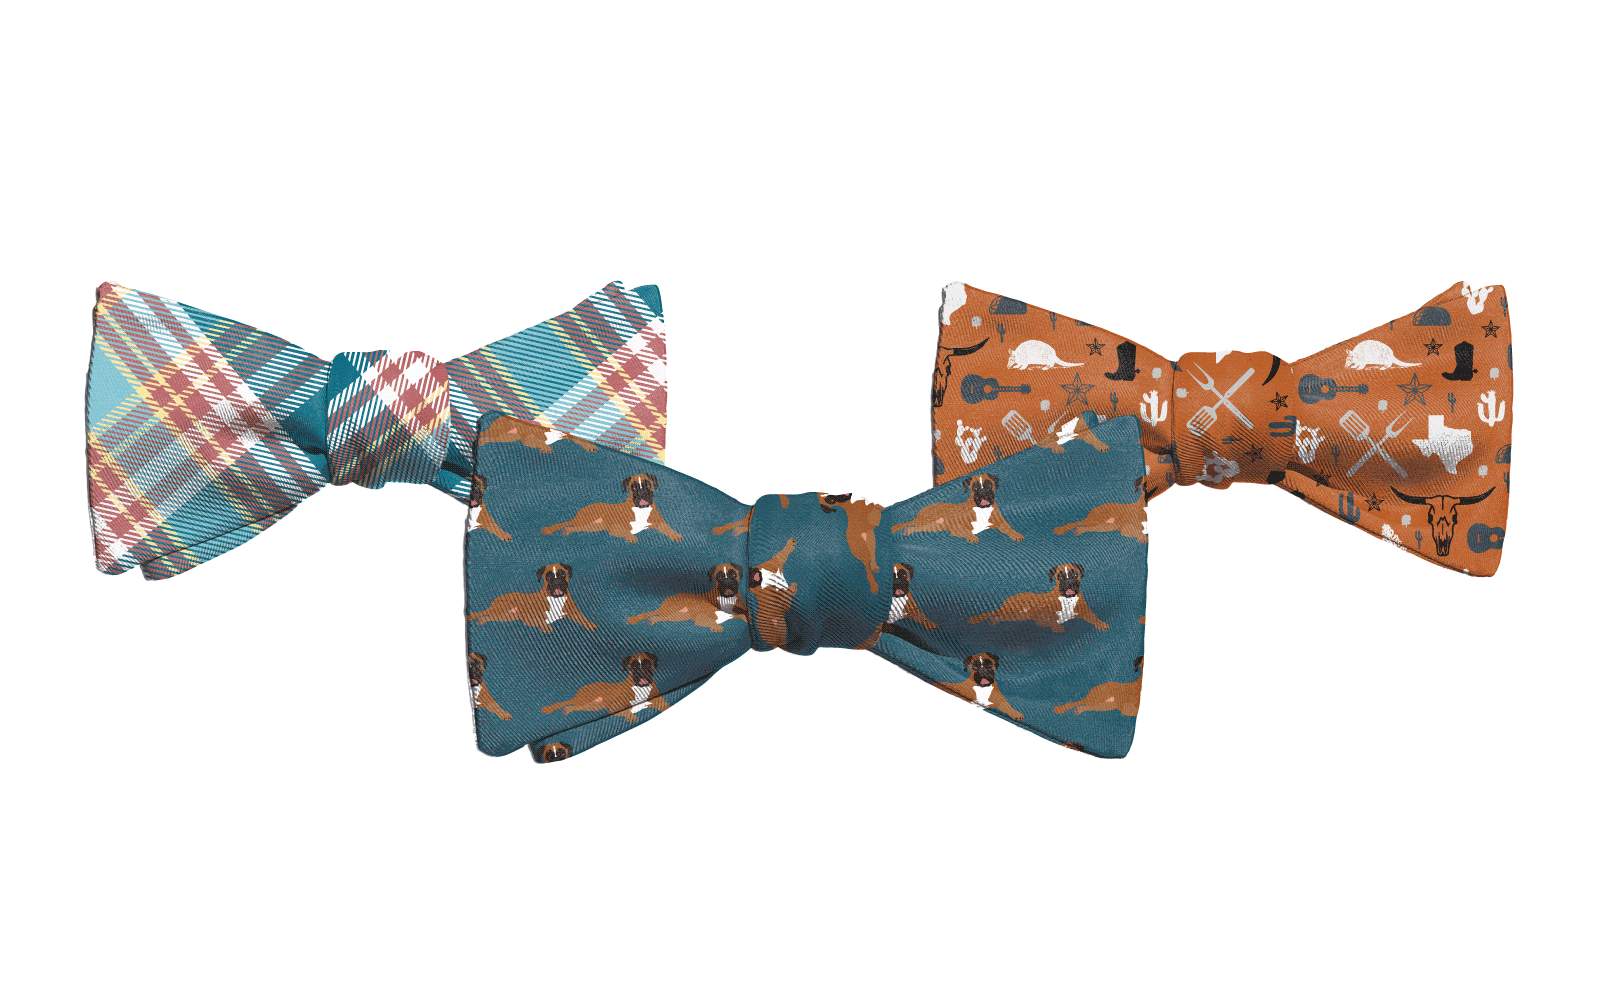 Three customizable bow ties changing colors with plaid dogs and states patterns